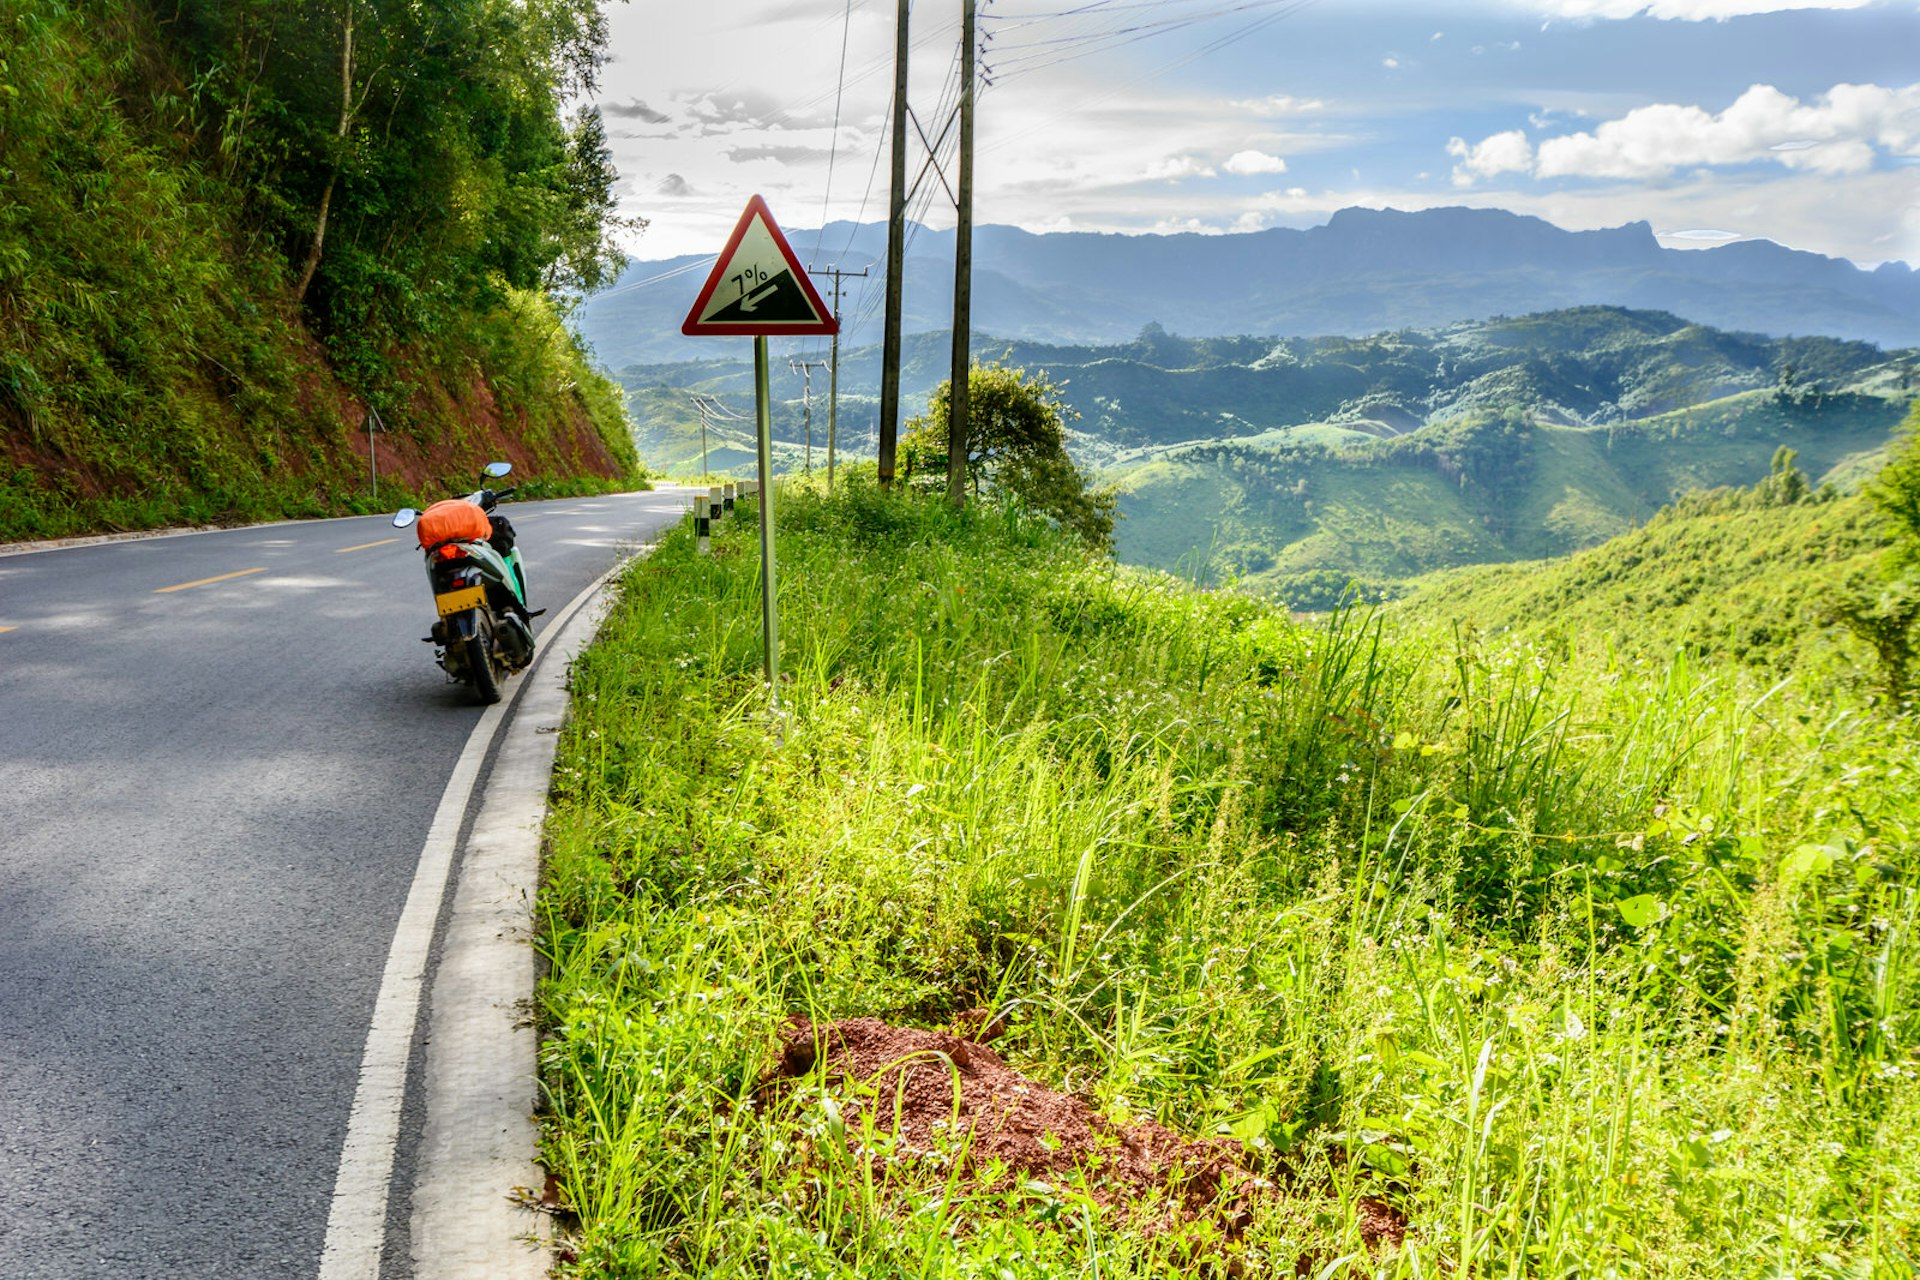 A parked motorcycle on a remote road in northern Laos